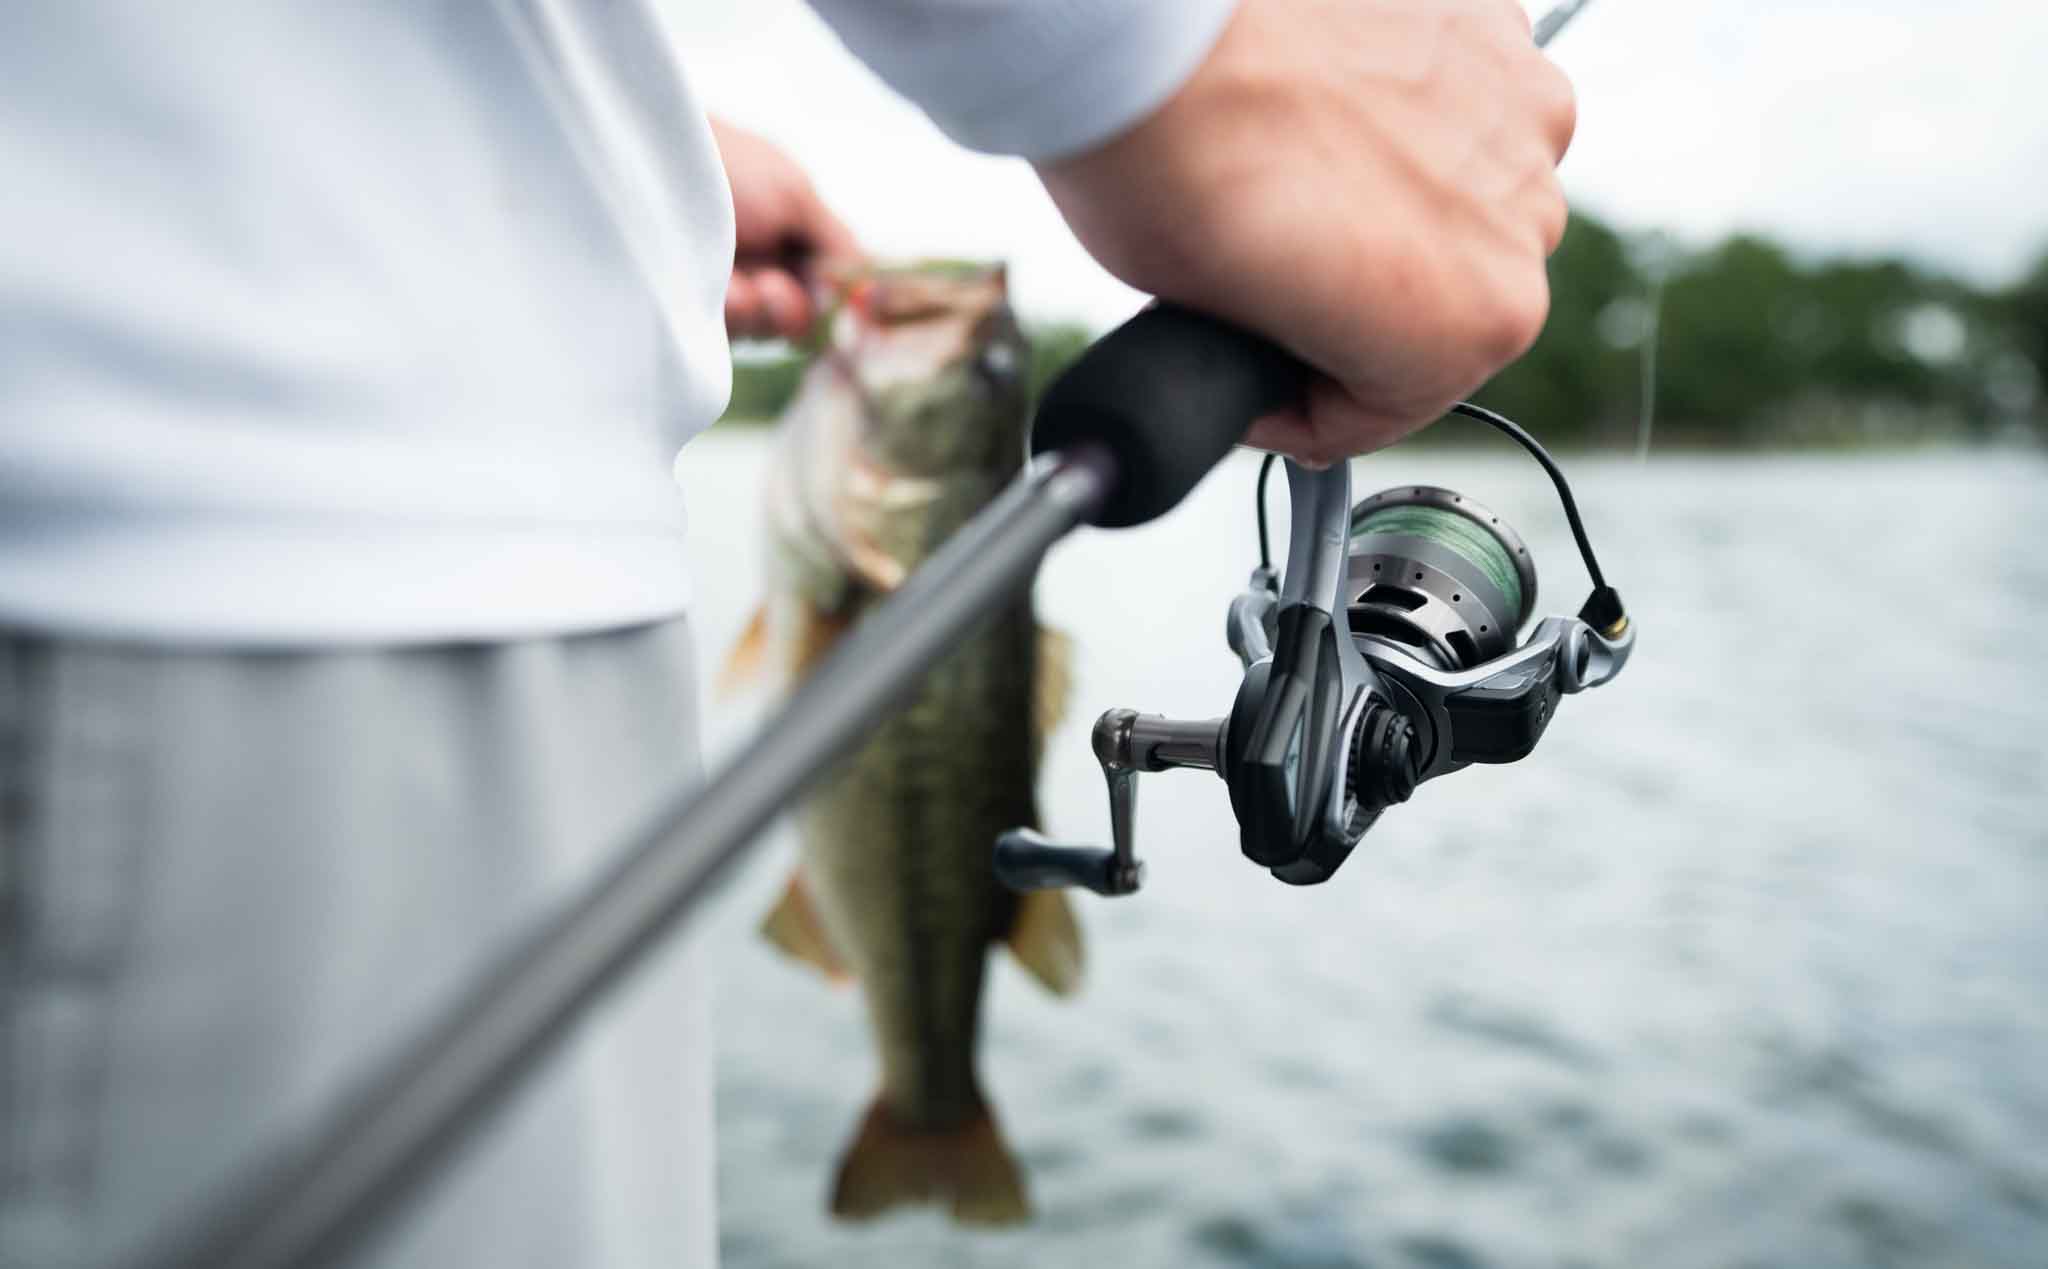 Fishing tackle from the world's most trusted fishing gear brands - Pure  Fishing